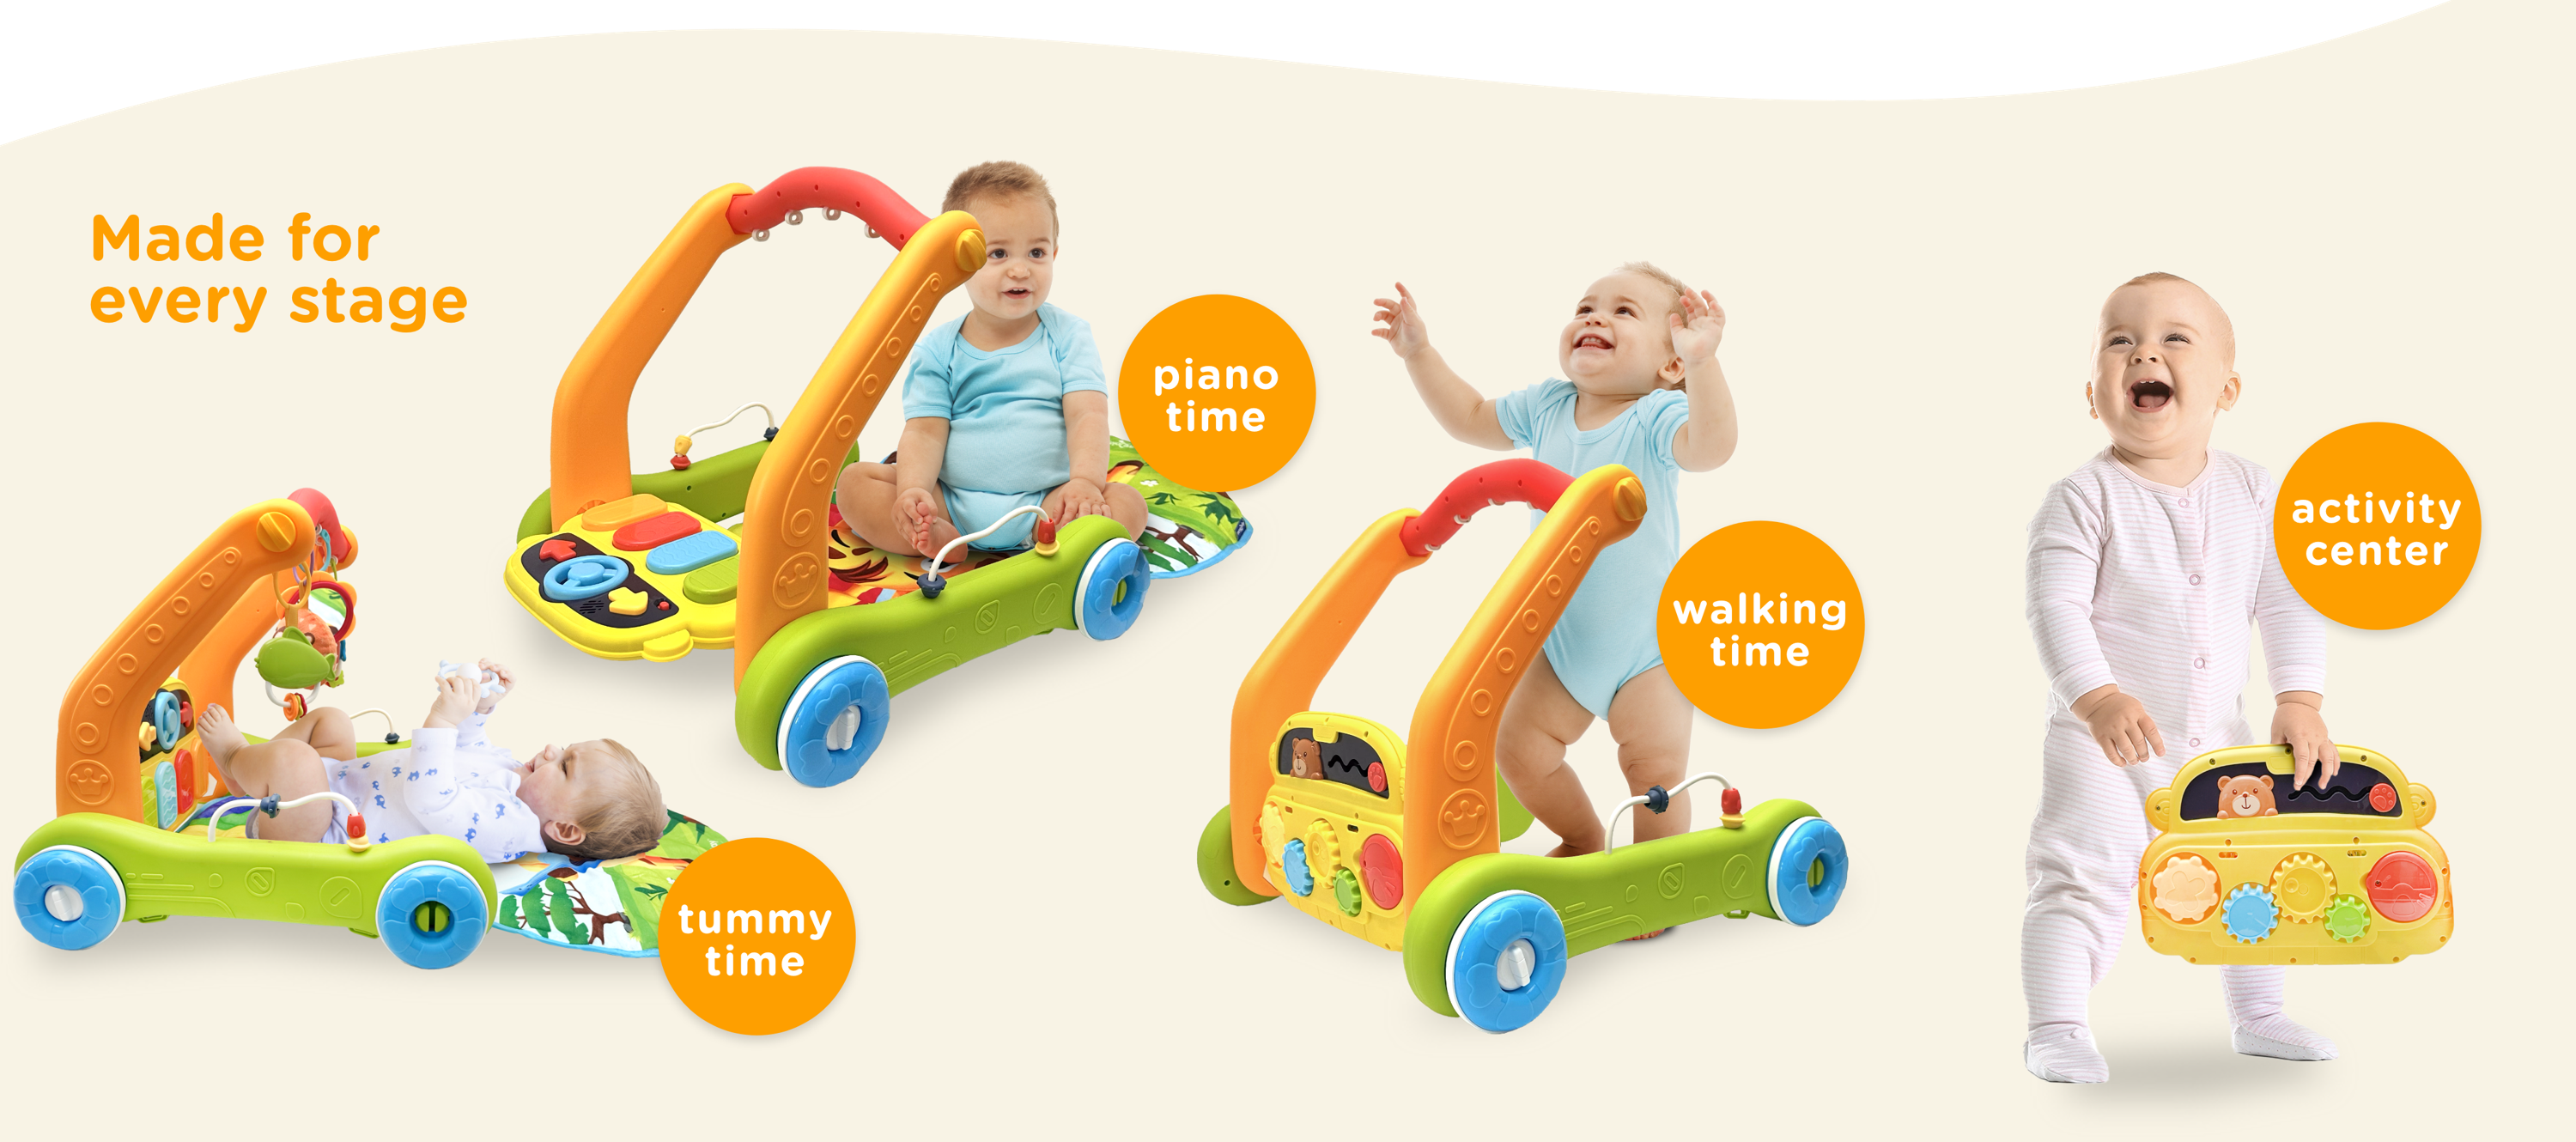 Made for every stage: tummy time, piano time, walking time, activity center